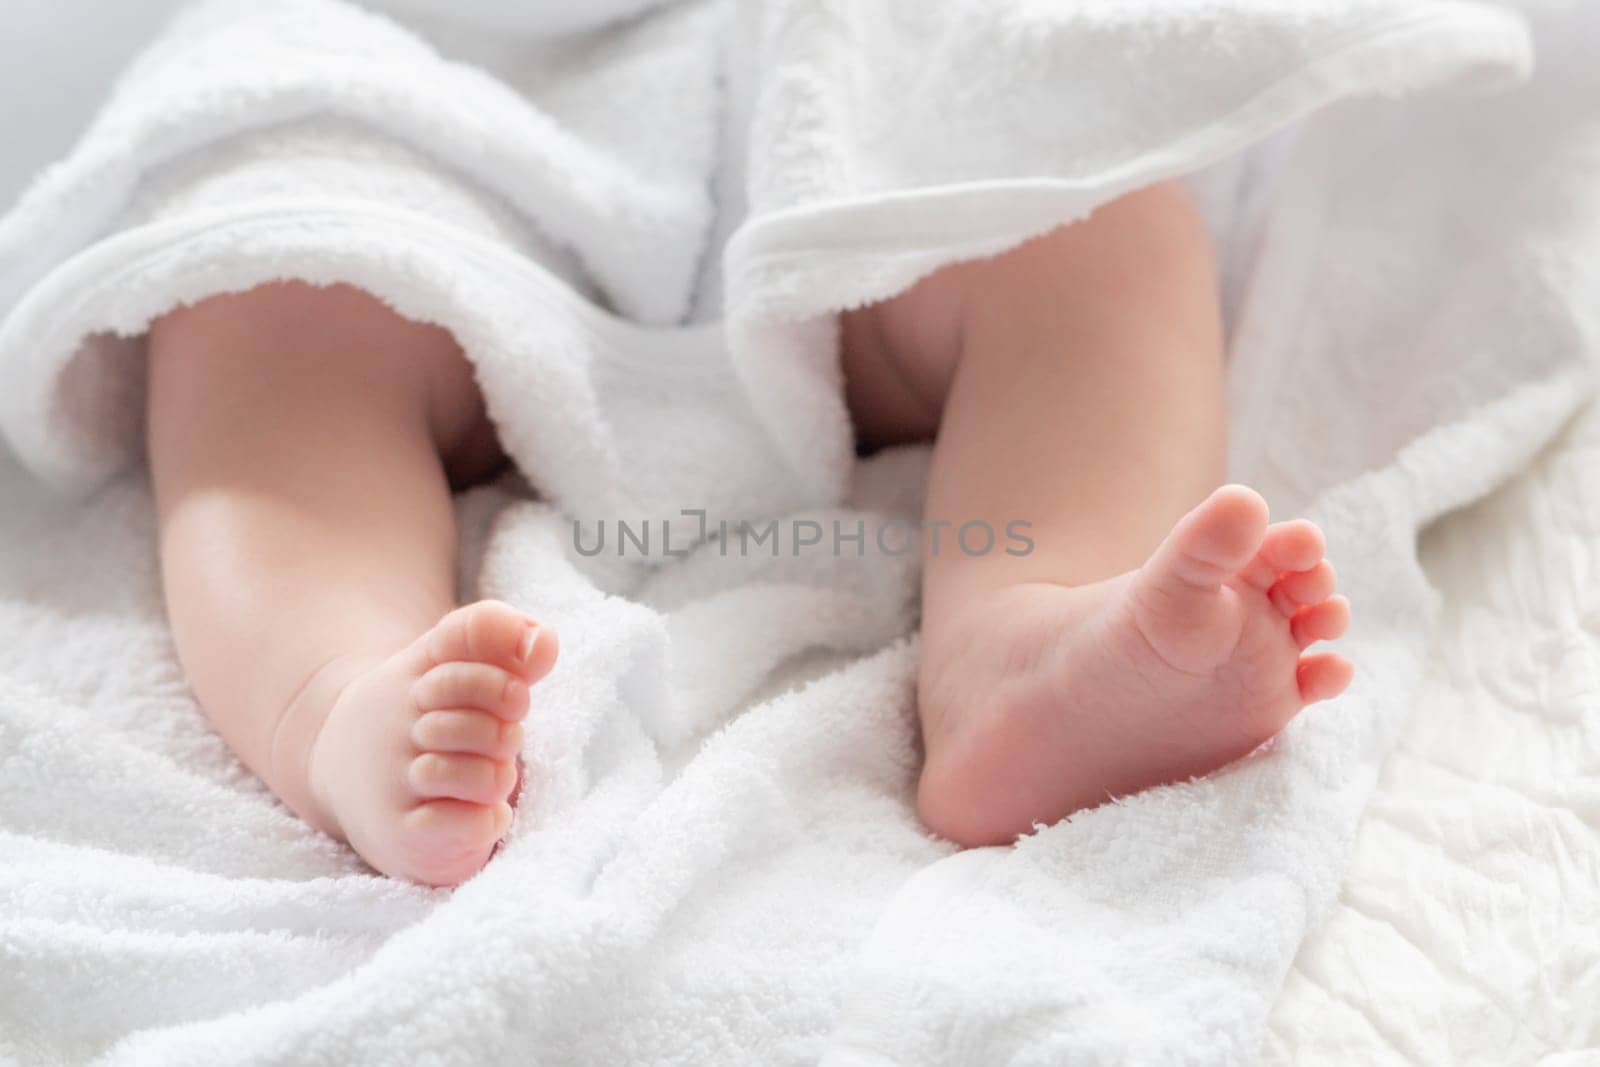 A baby's feet, representing the pure start of a life journey, subtly peek out from the comforting embrace of a white towel, symbolizing protection and care